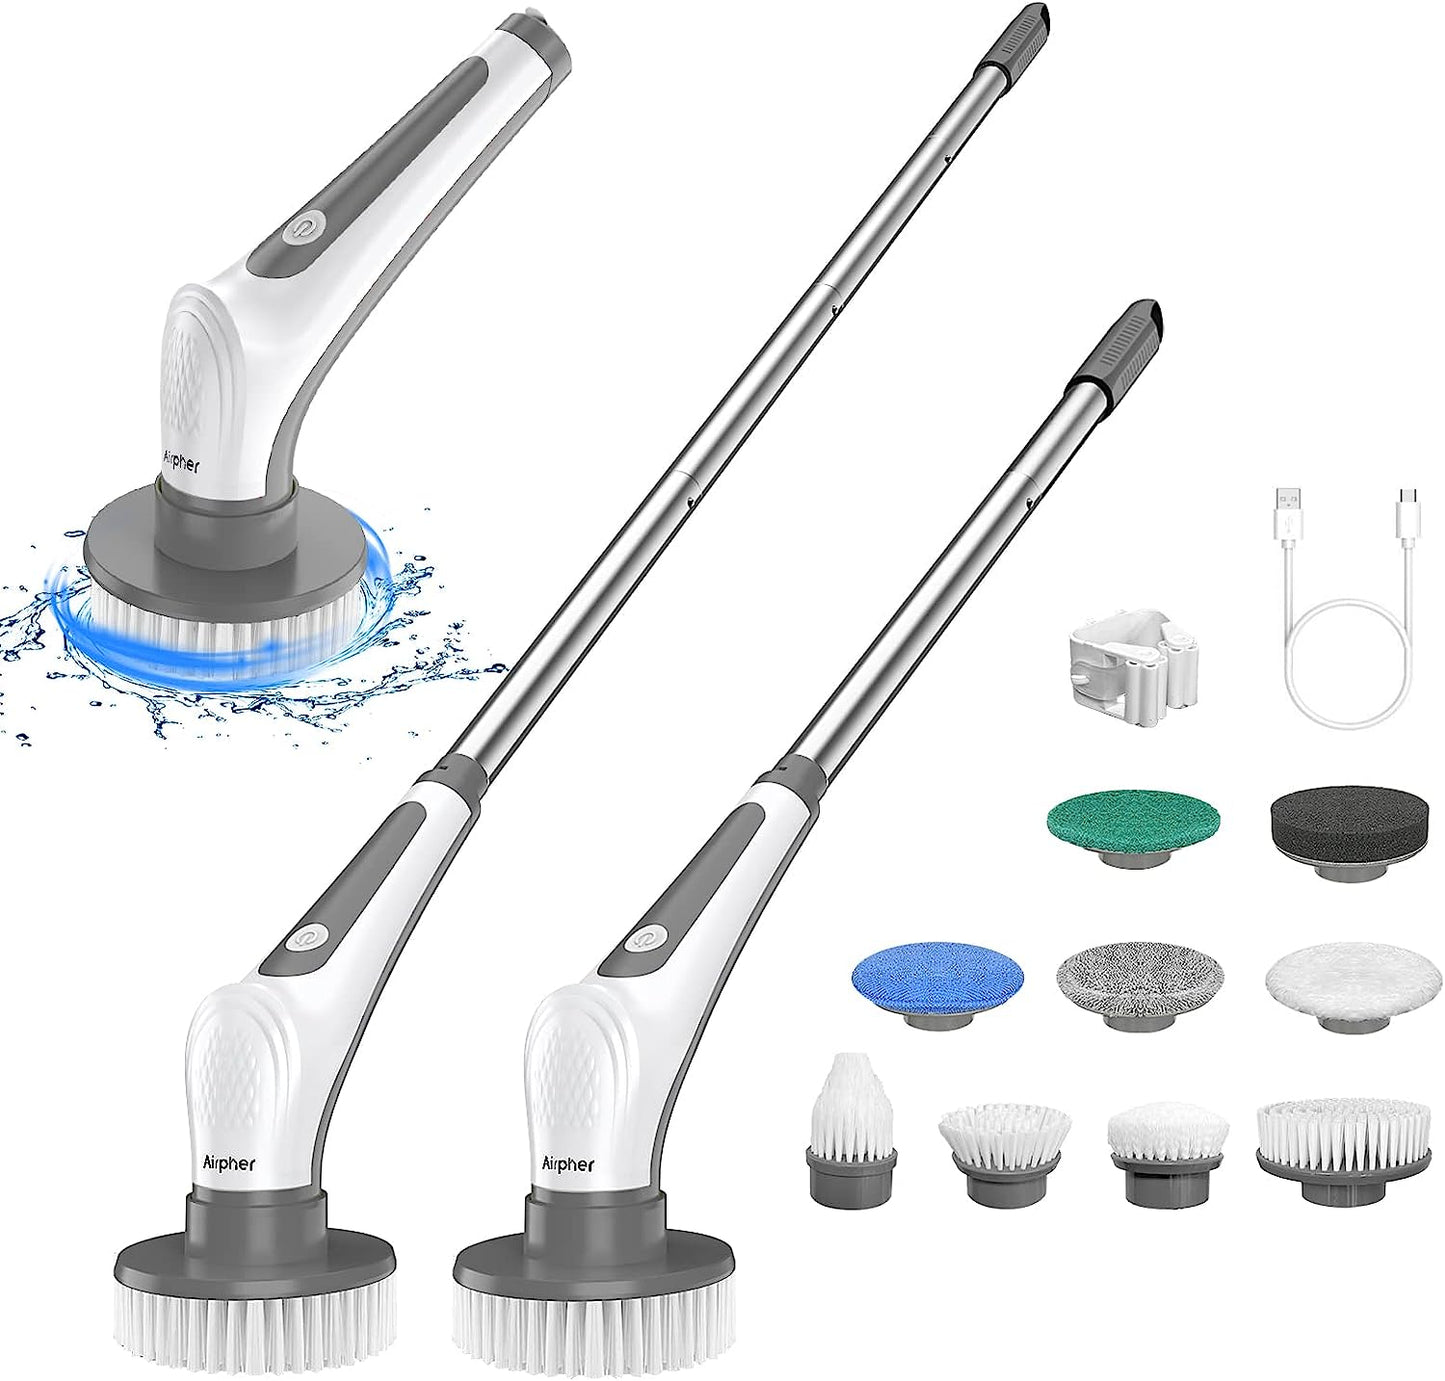 Electric Spin Scrubber, 10 in 1 Airpher Cordless Cleaning Brush IPX8 with 9  Replaceable Brush Heads and 4 Tier Removable Handle, Power Shower Scrubber